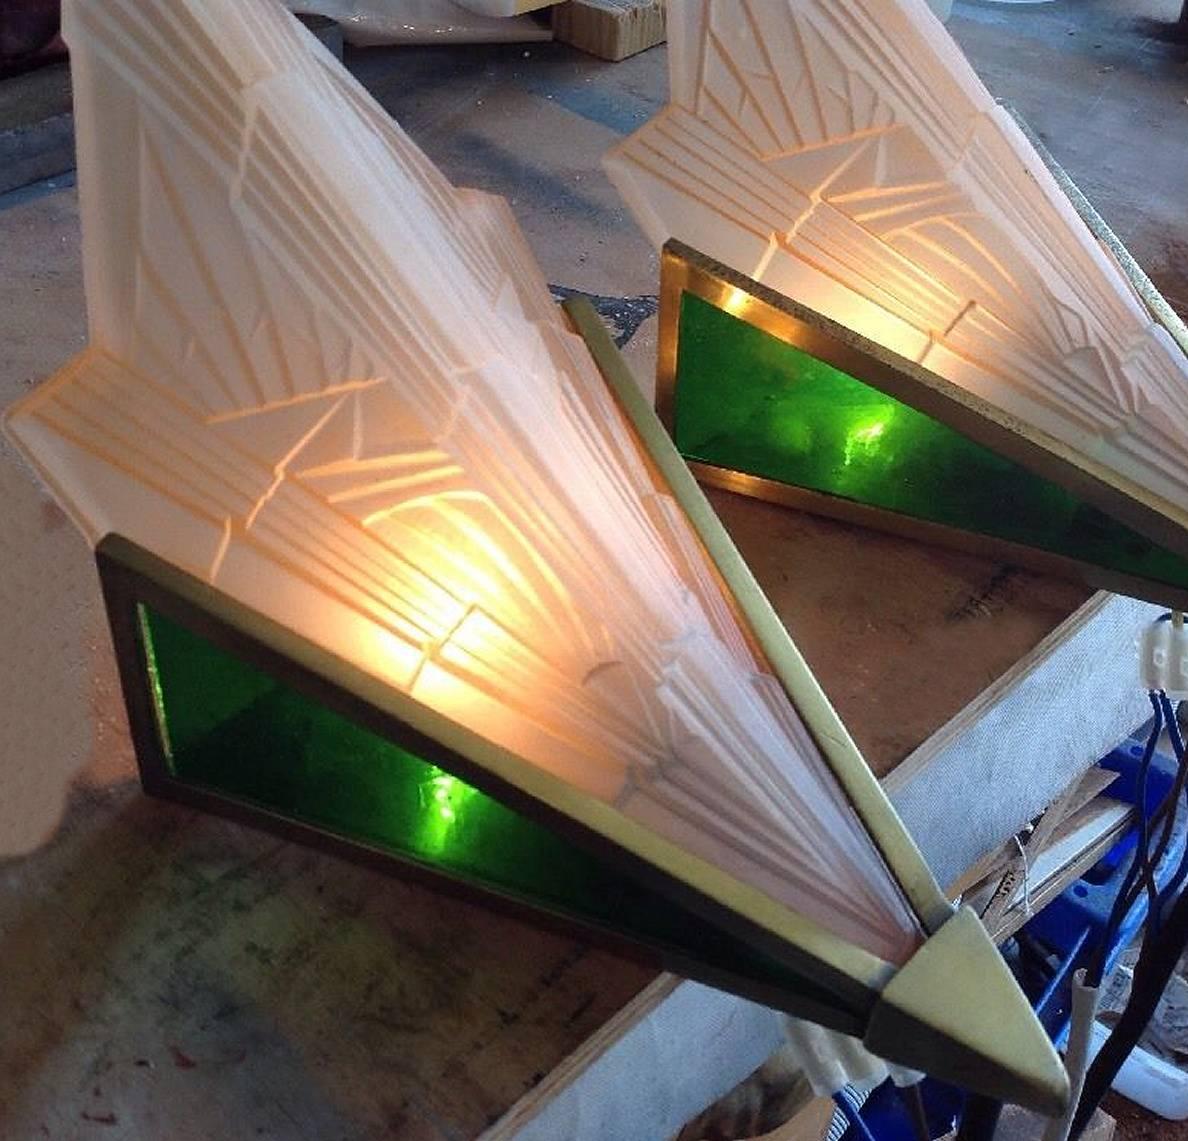 A rare chance to gain these rare and stylish pair of 1930s Art Deco wall lights. Blush pink geometric moulded and frosted glass slip in shades, lacquered brass fittings with emerald green glass side slips, period Ediswan brass bulb holders with